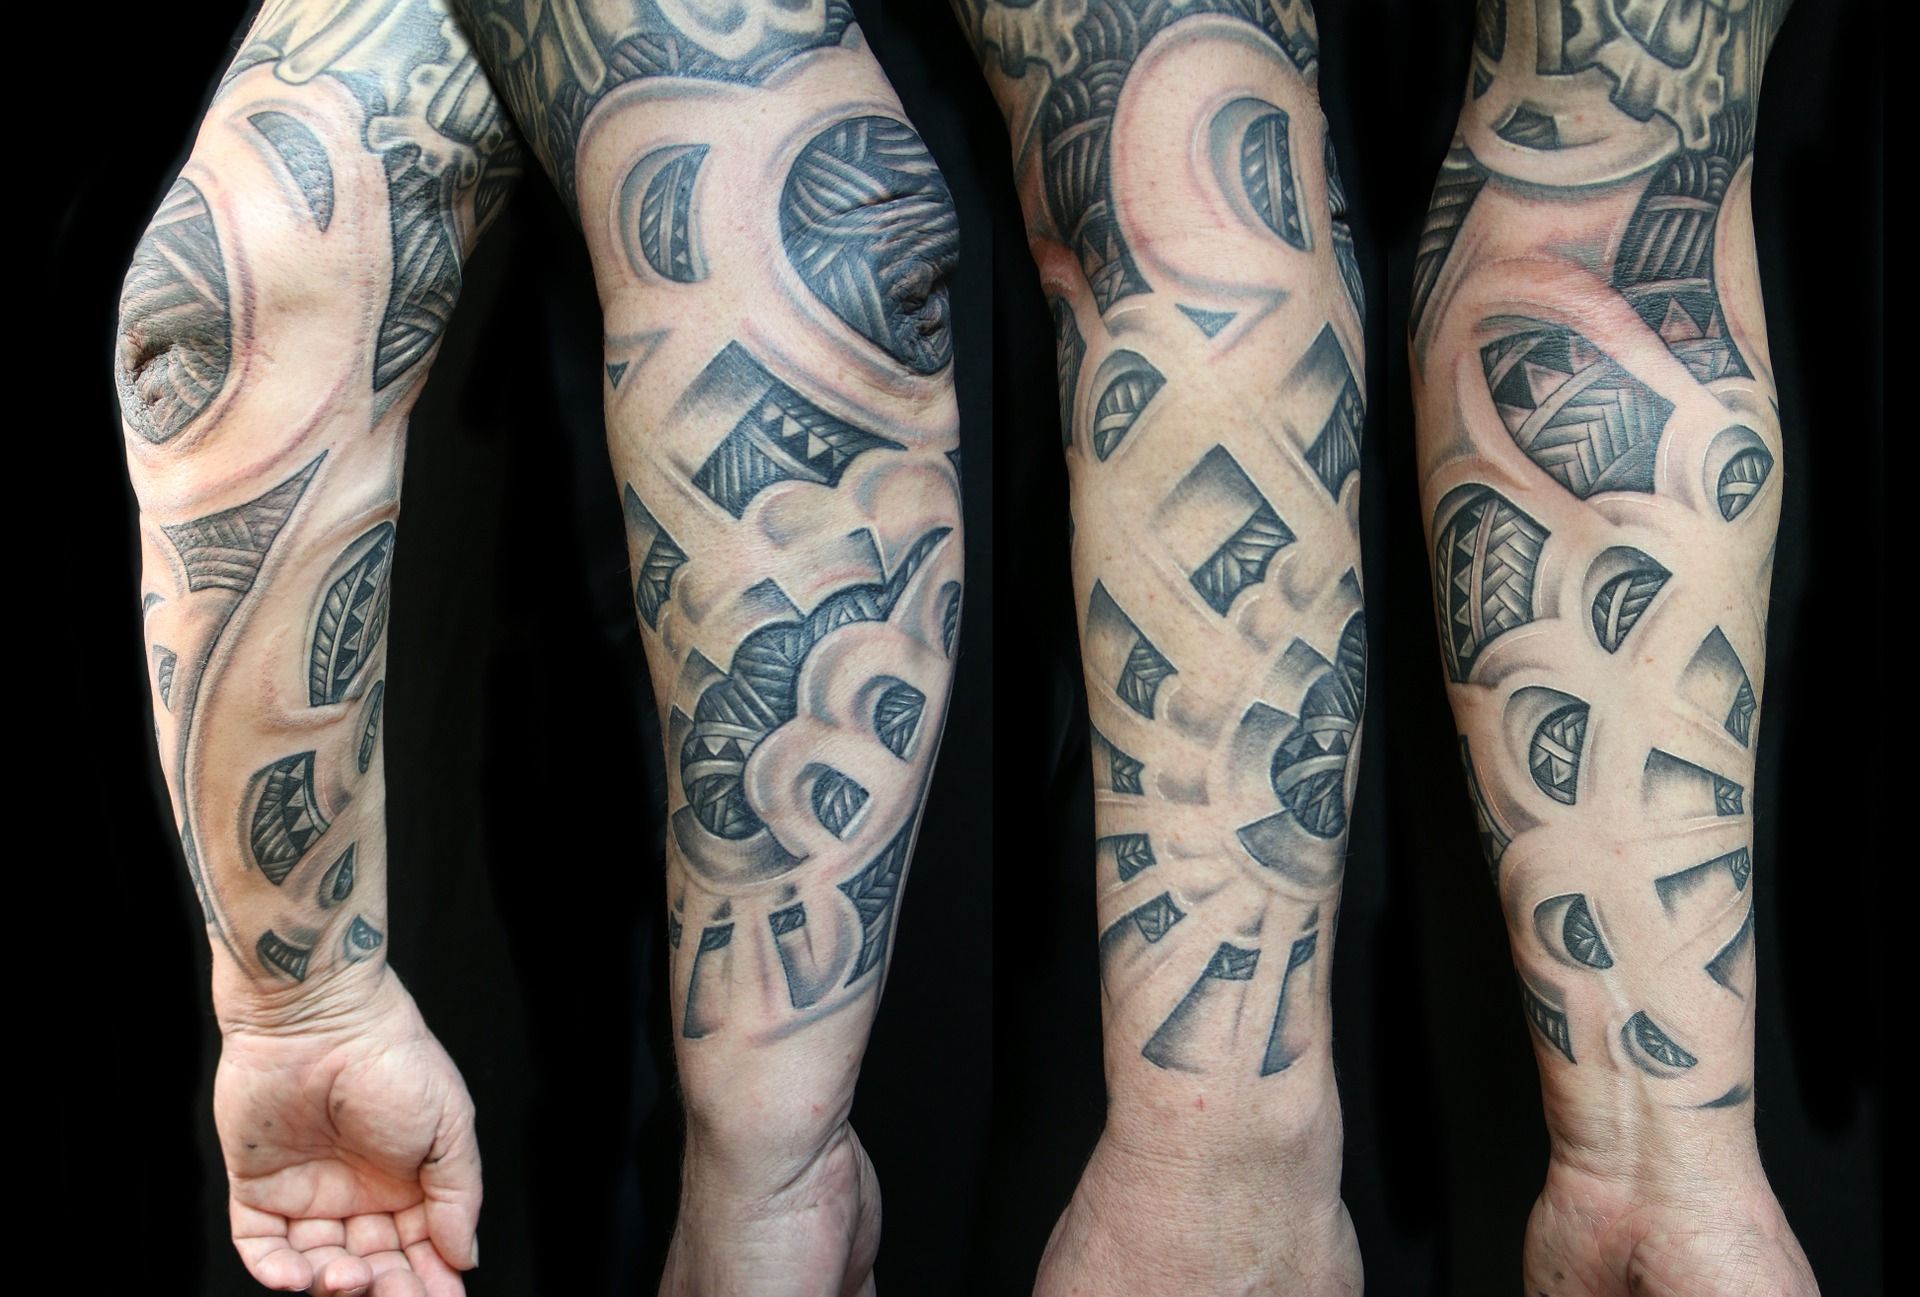 Marines allowed to have sleeve tattoos revised Marine Corps policy says